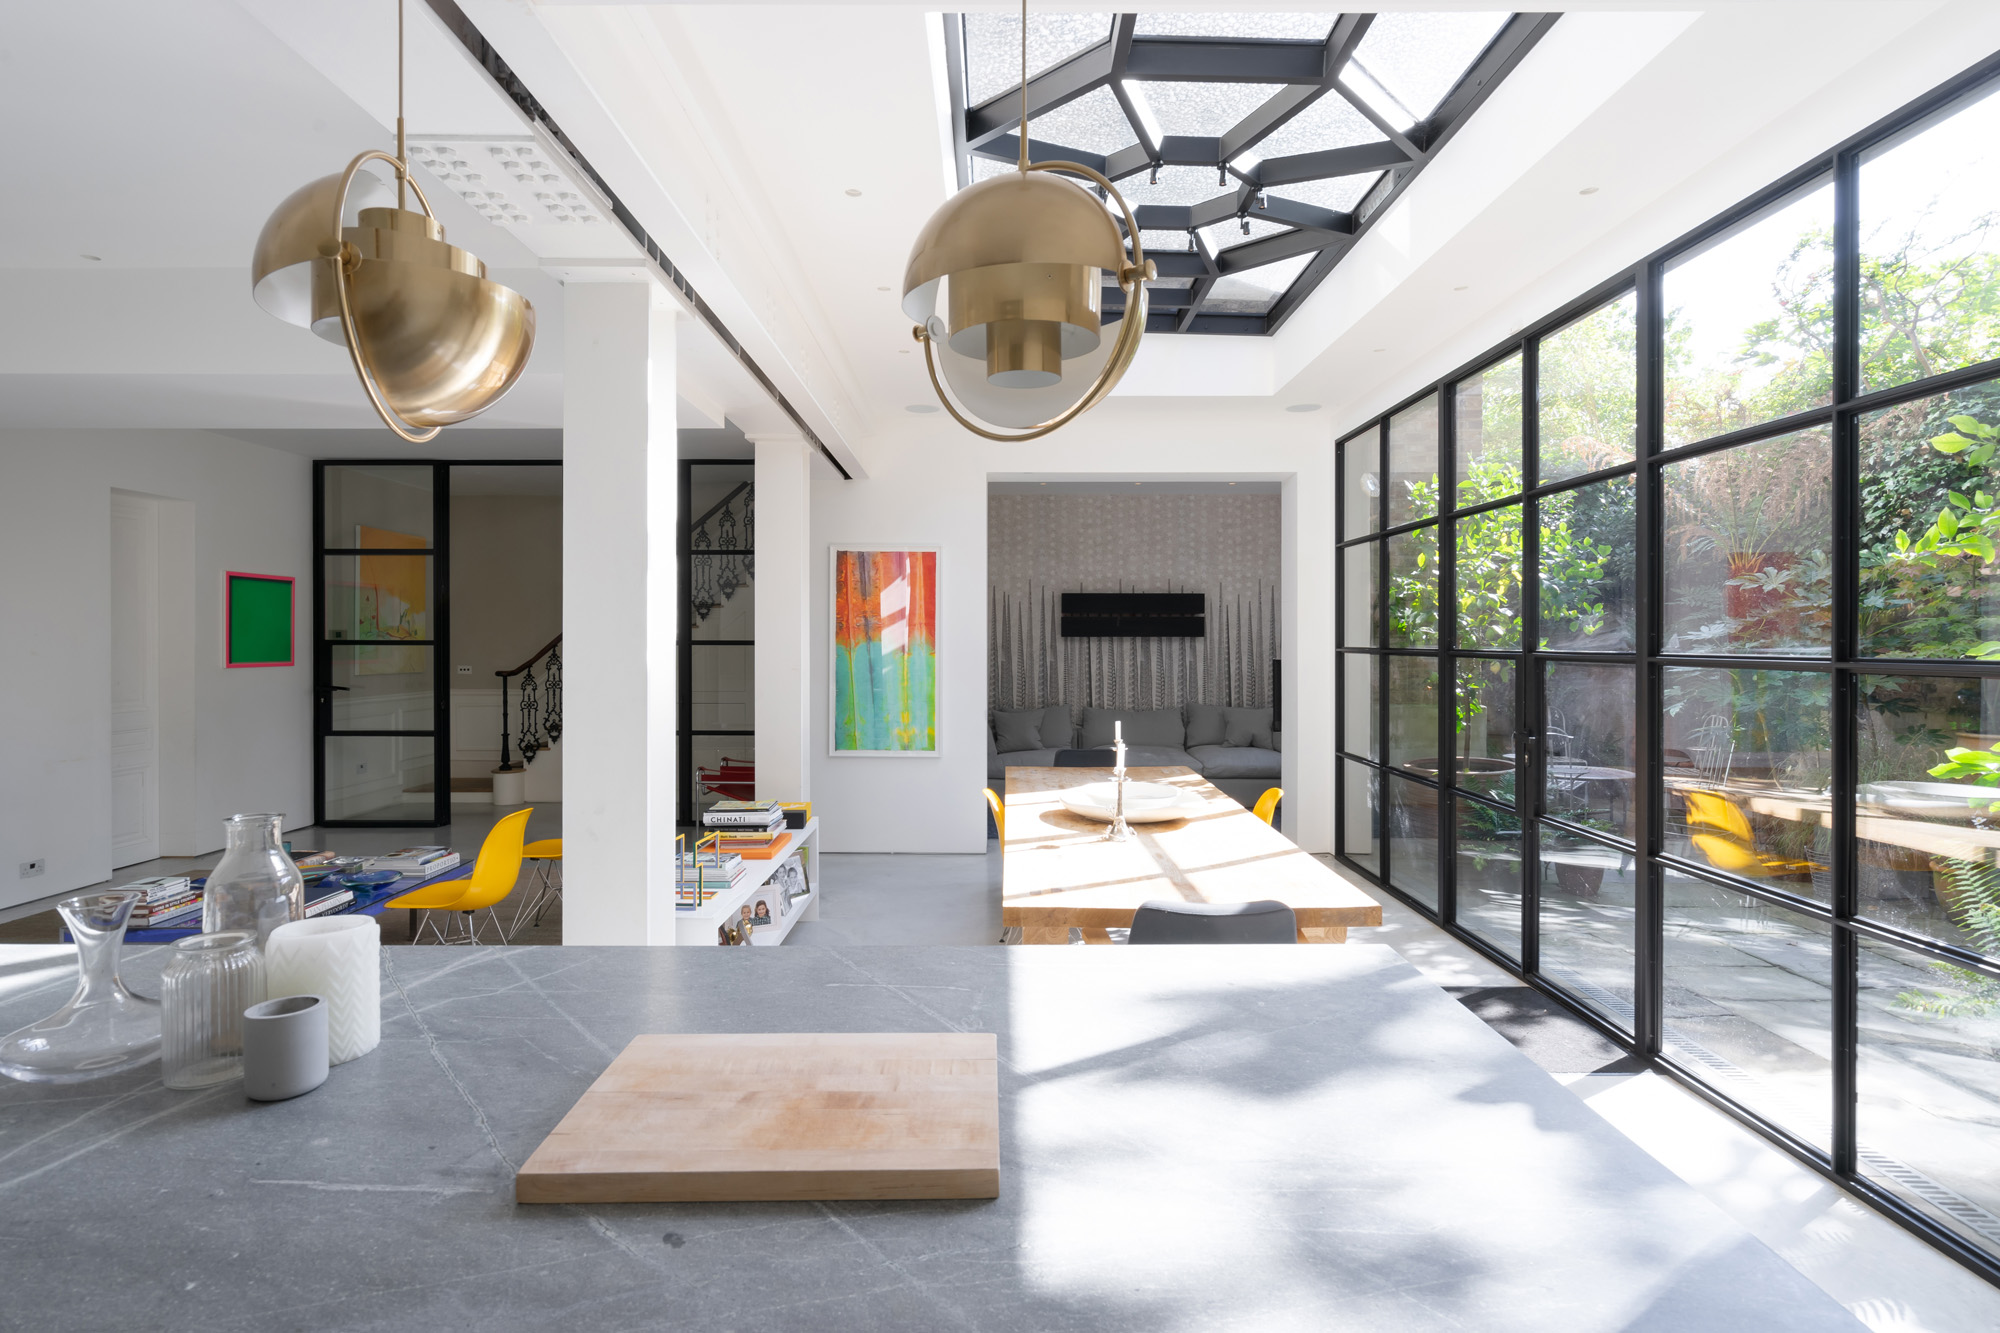 For Sale: Sunderland Terrace Notting Hill W11 Crittall Doors and modern kitchen dining room